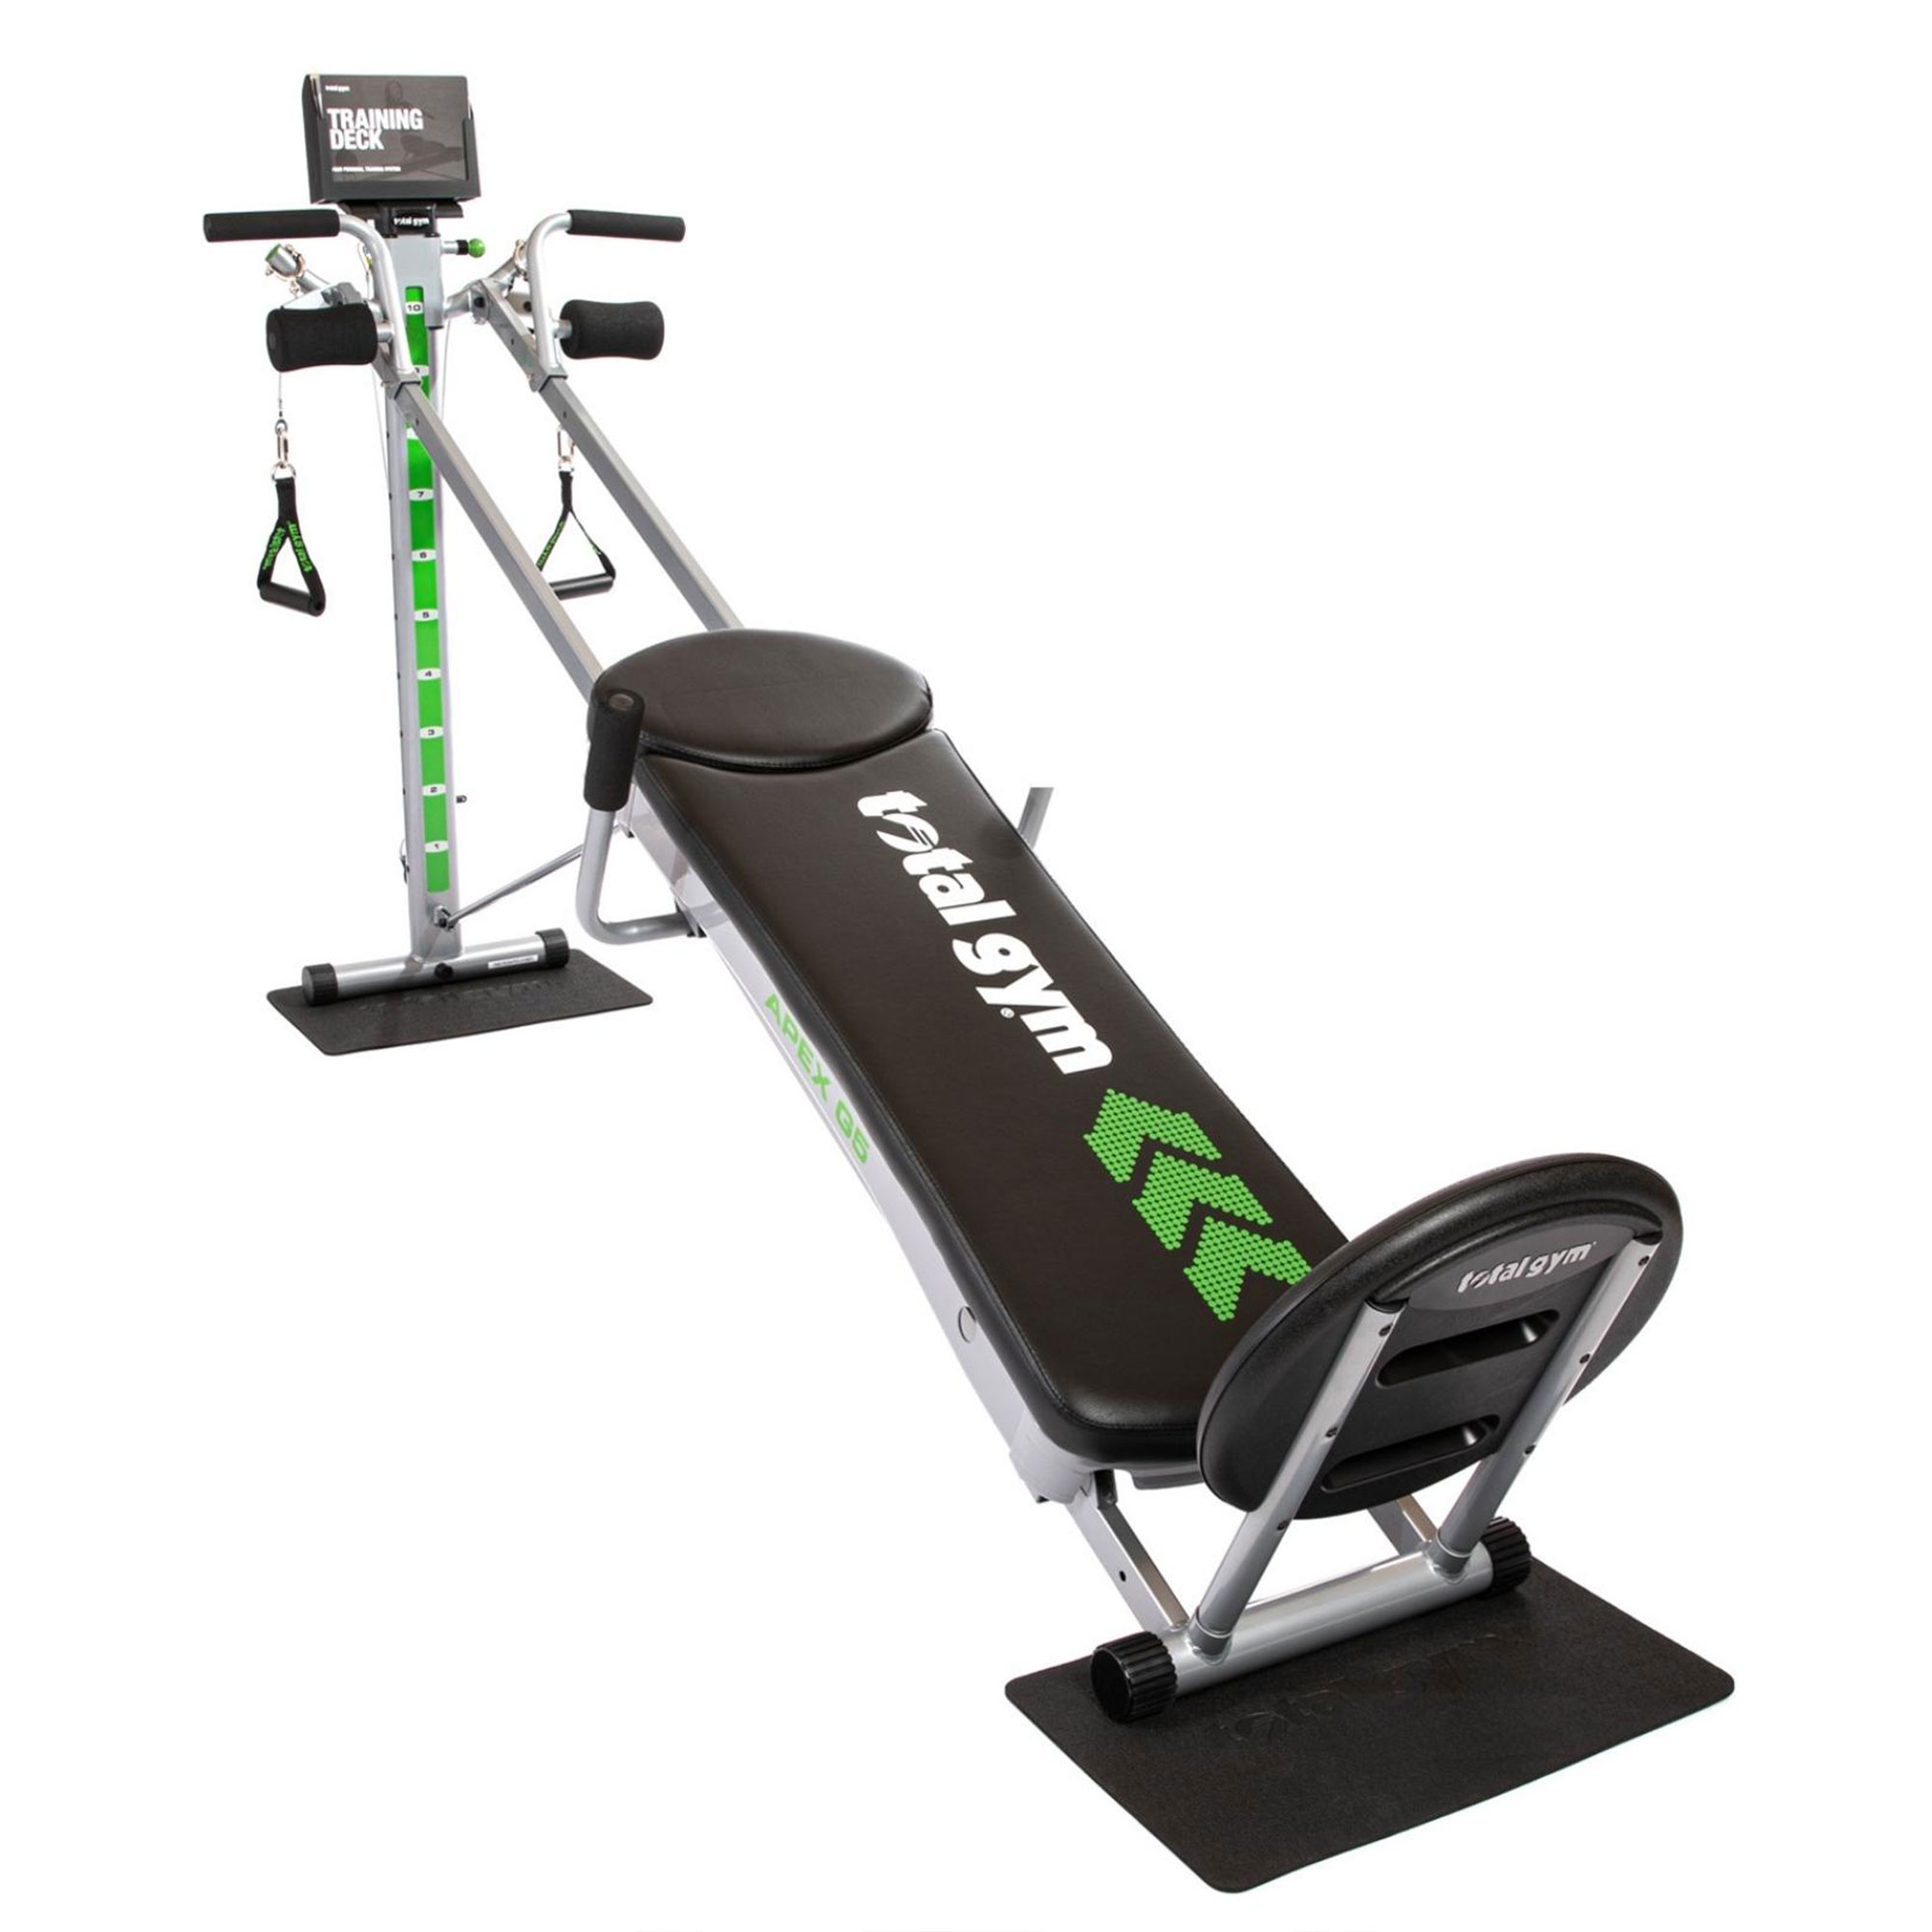 Total Gym APEX G5 Home Fitness Incline Weight Training with 10 Resistance Levels - image 1 of 11